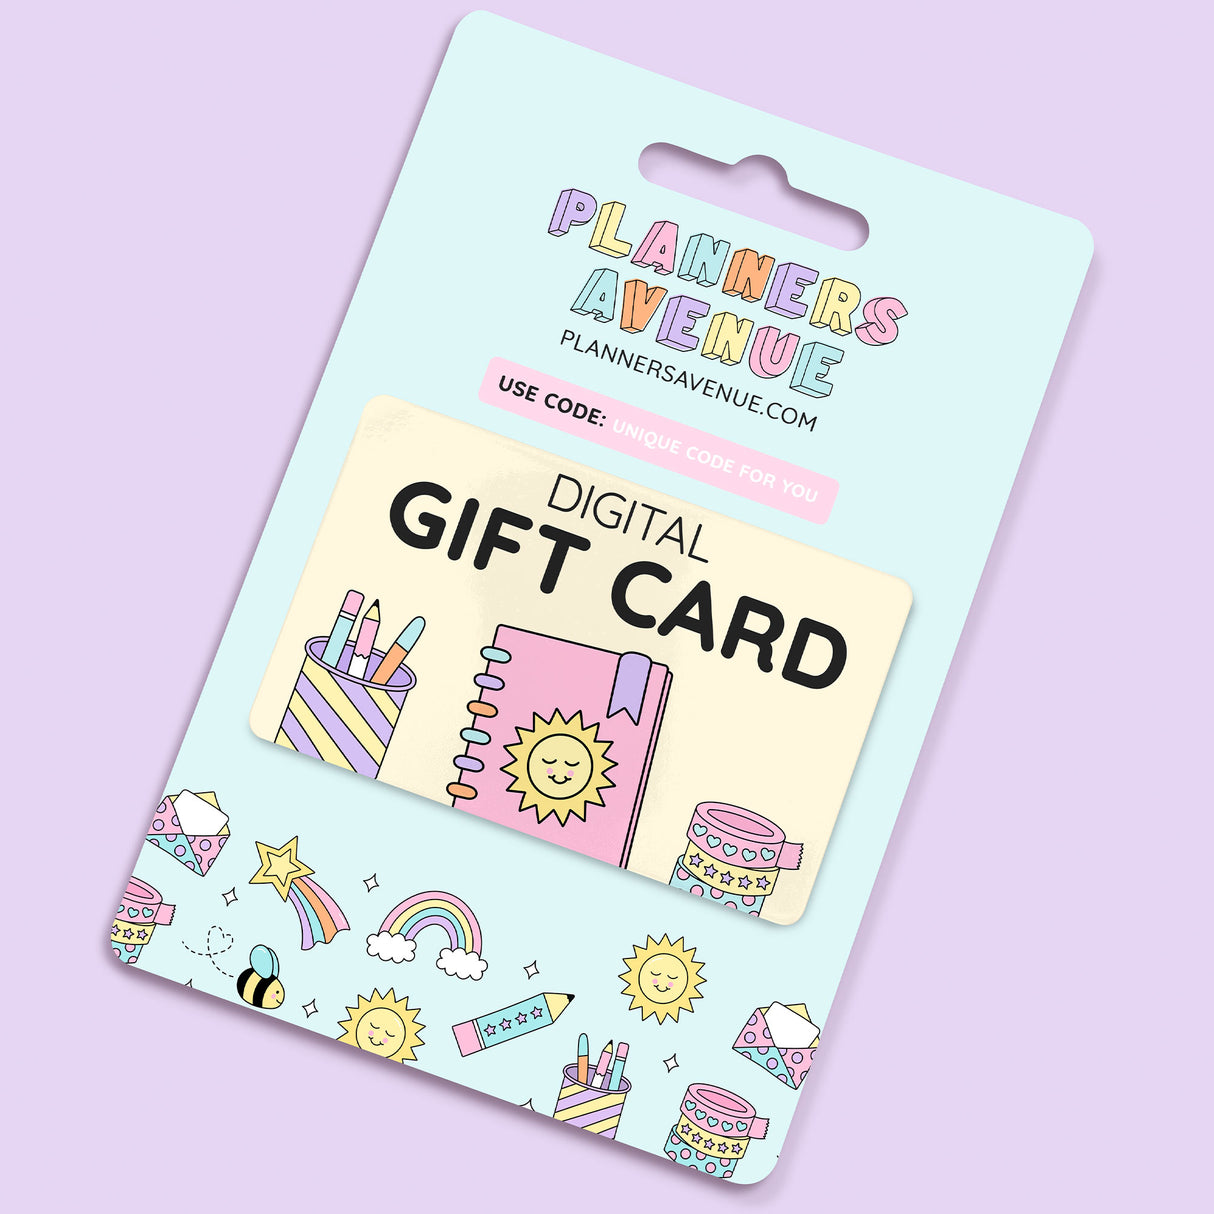 Planners Avenue Gift Card